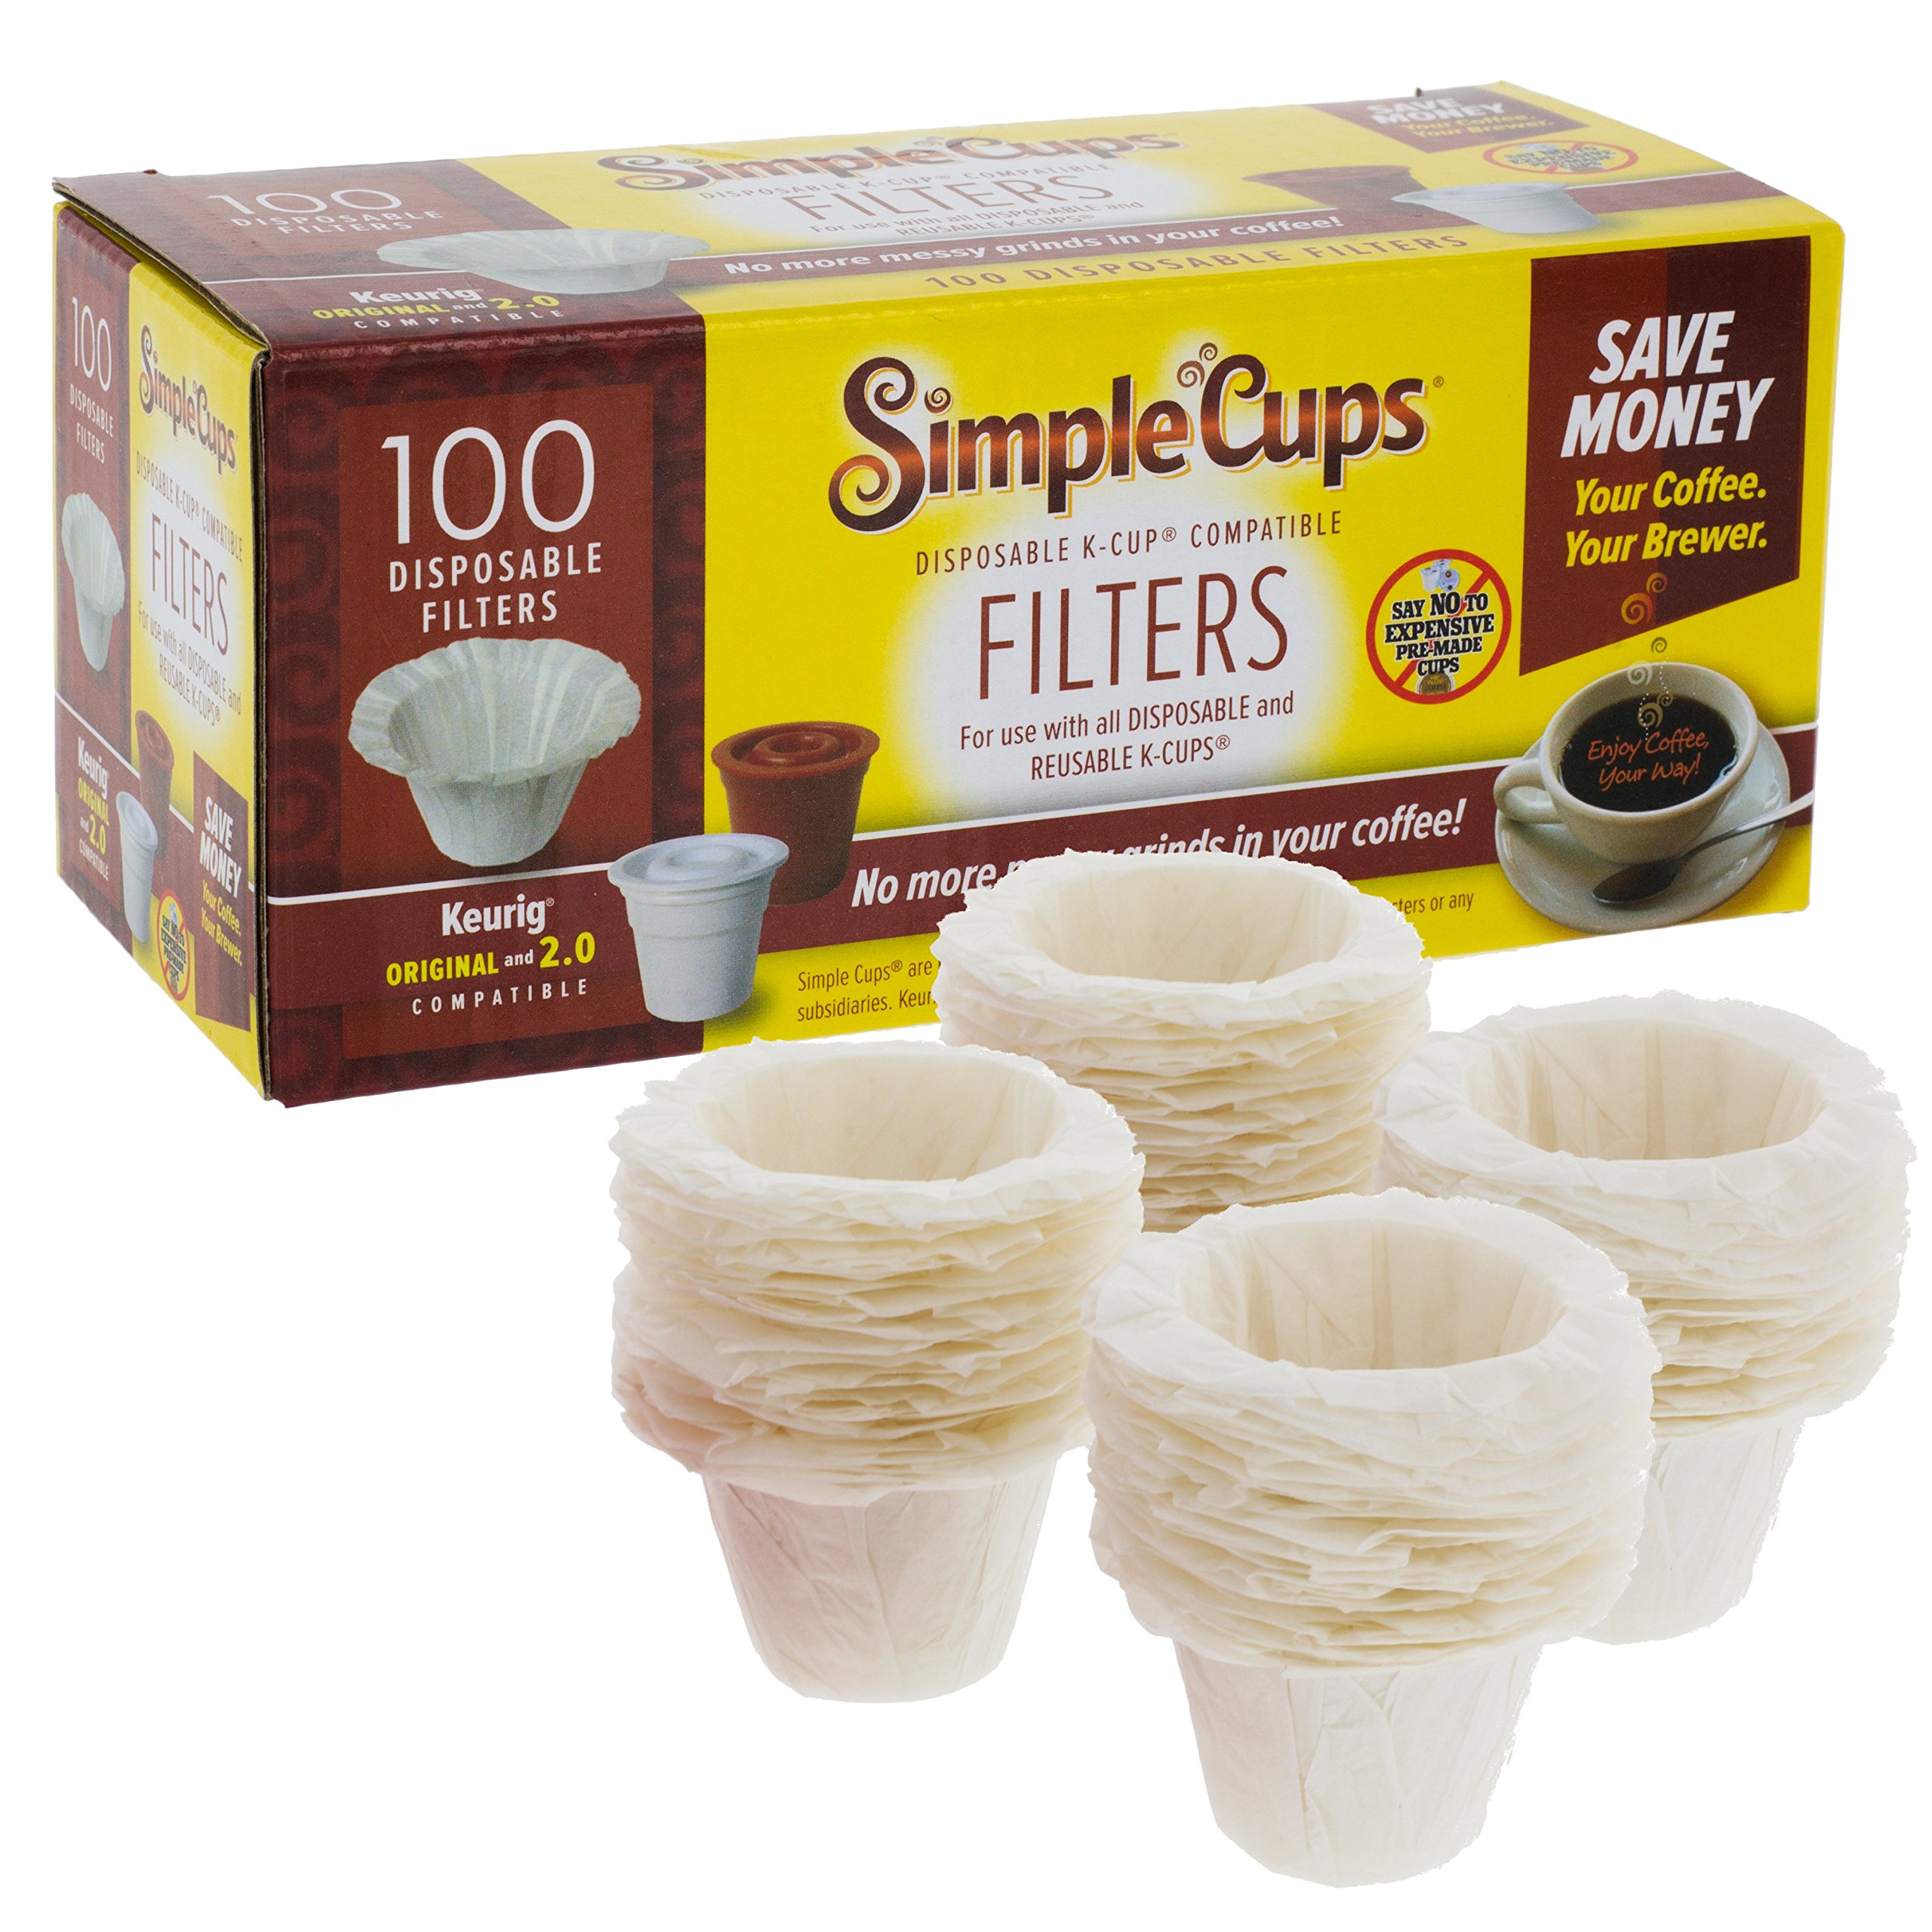 Book Cover Disposable Paper Coffee Filters 100 count - Compatible with Keurig, K-Cup machines & other Single Serve Coffee Brewer Reusable K Cups - Use Your Own Coffee & Make Your Own Pods - Works with All Brands